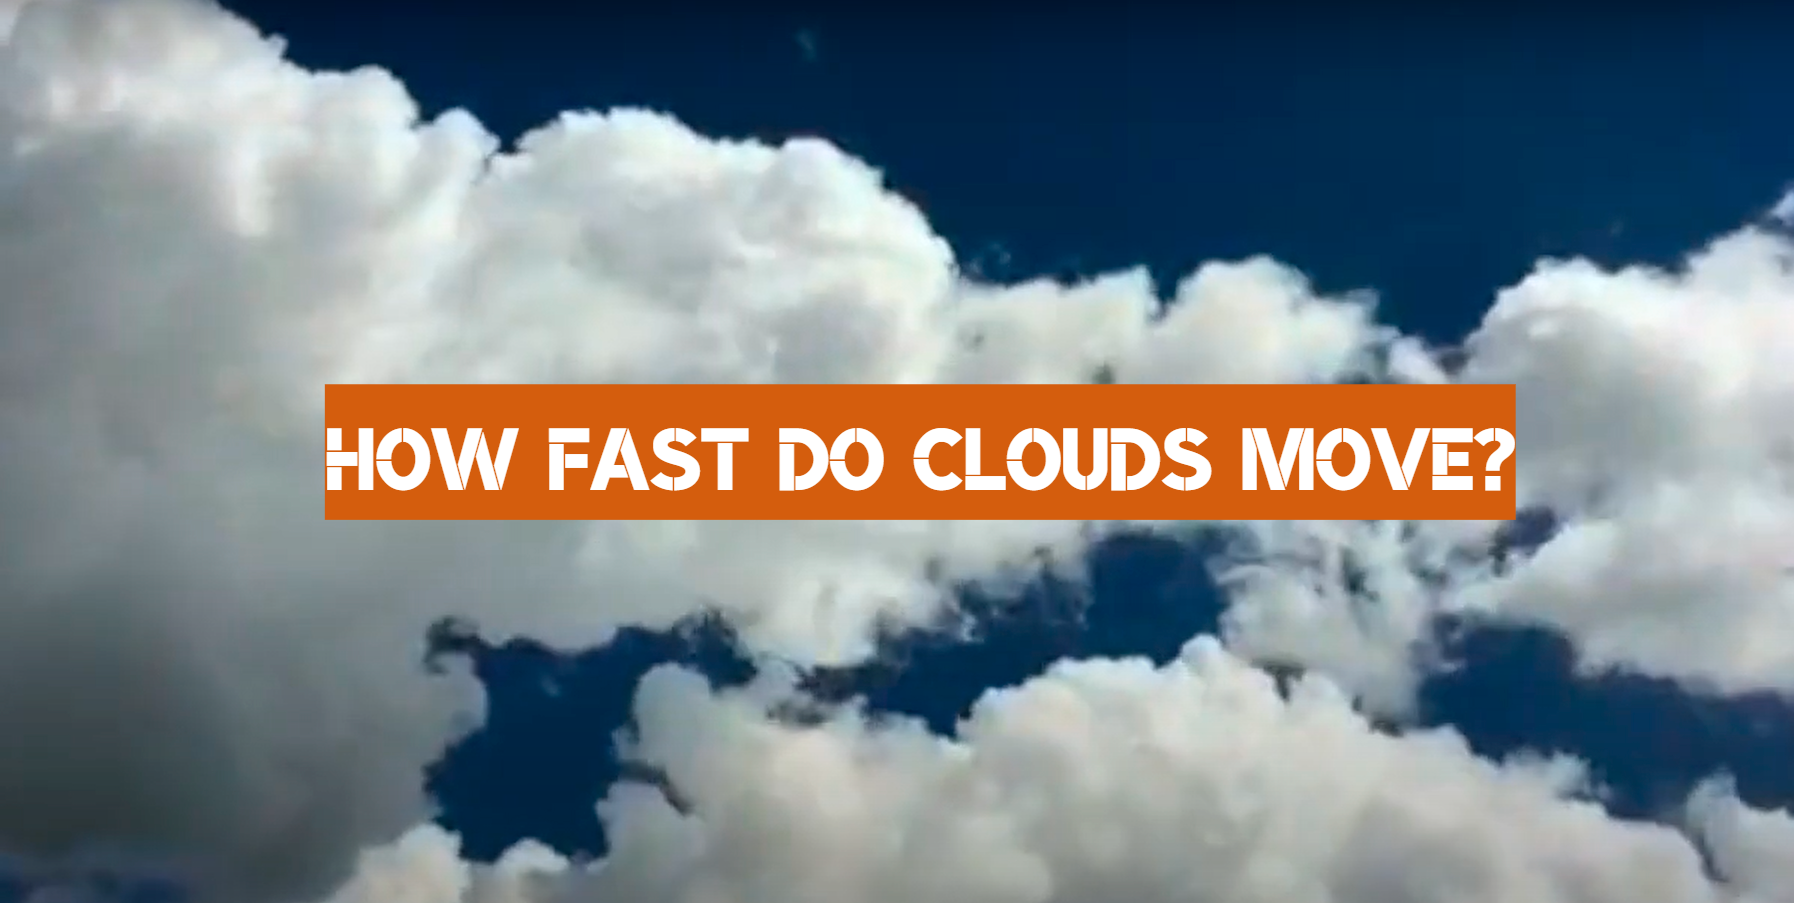 How Fast Do Clouds Move?